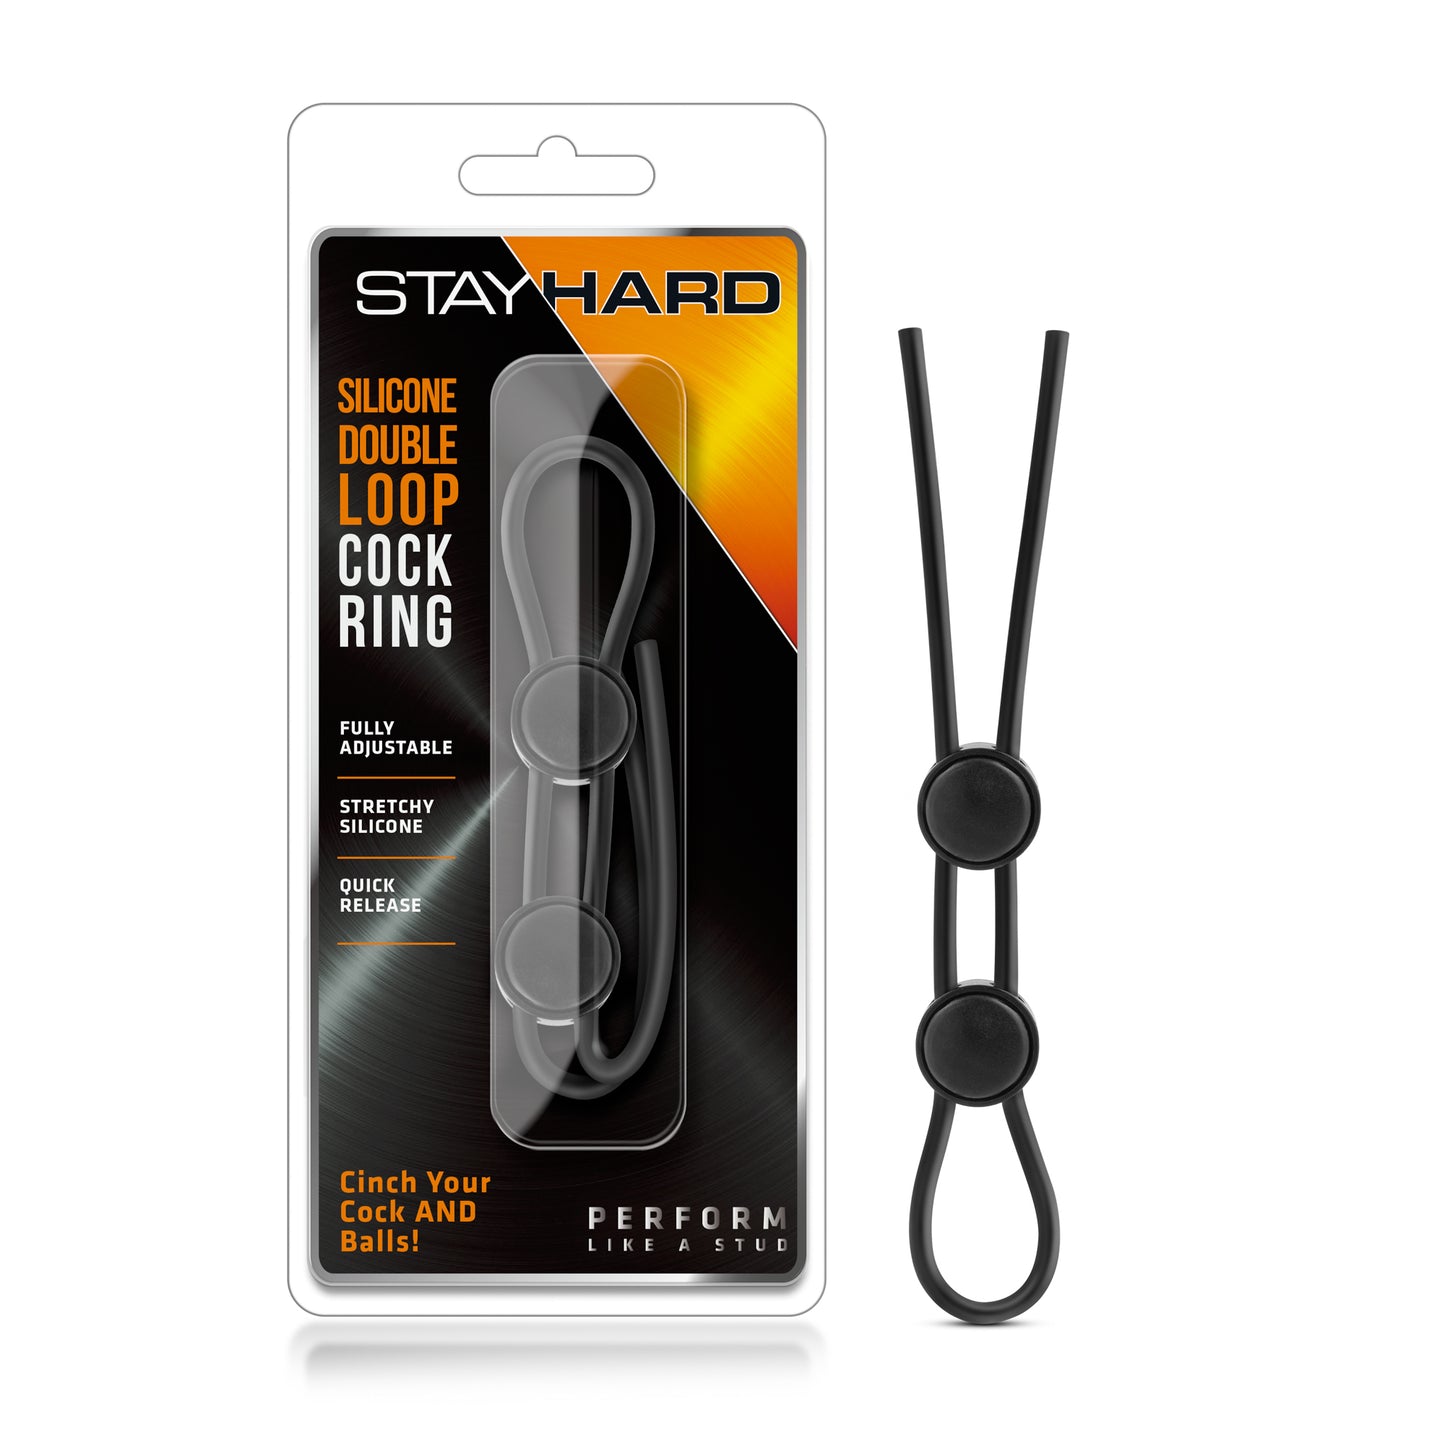 Stay Hard - Silicone Double Loop Cock Ring  - Black BL-32095